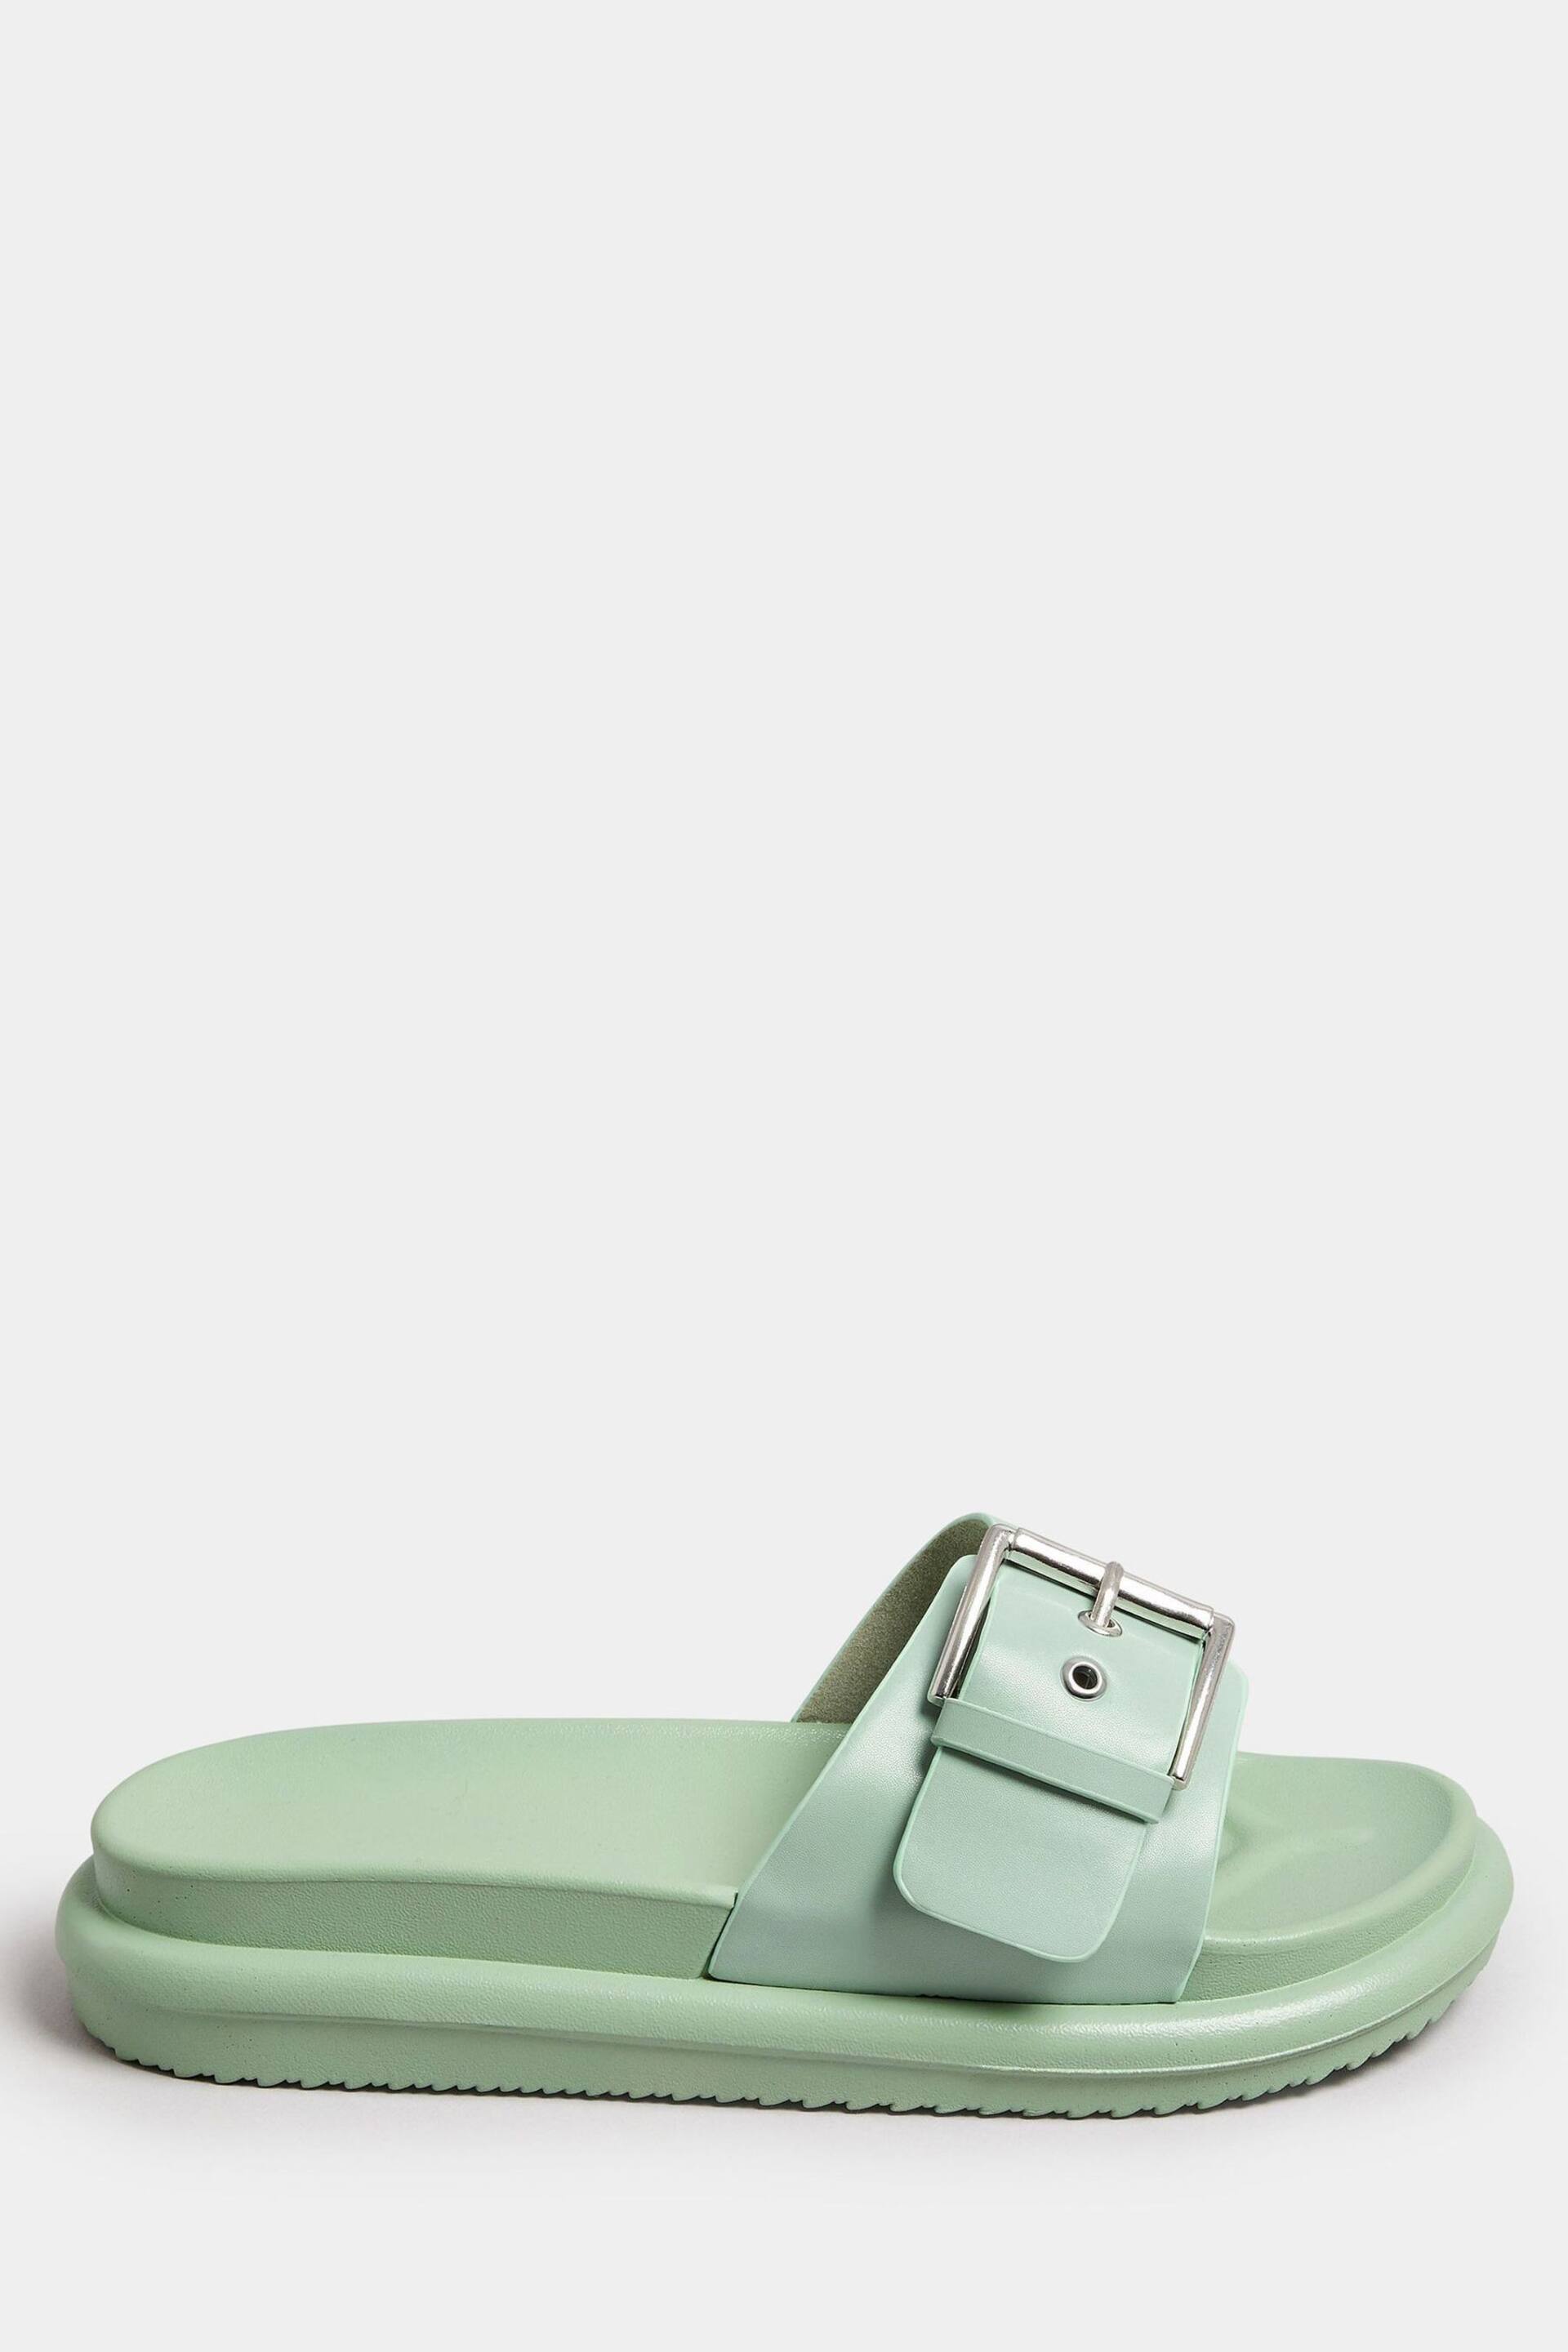 Yours Curve Green Buckle Strap Mule Sandal In Wide E Fit - Image 1 of 5